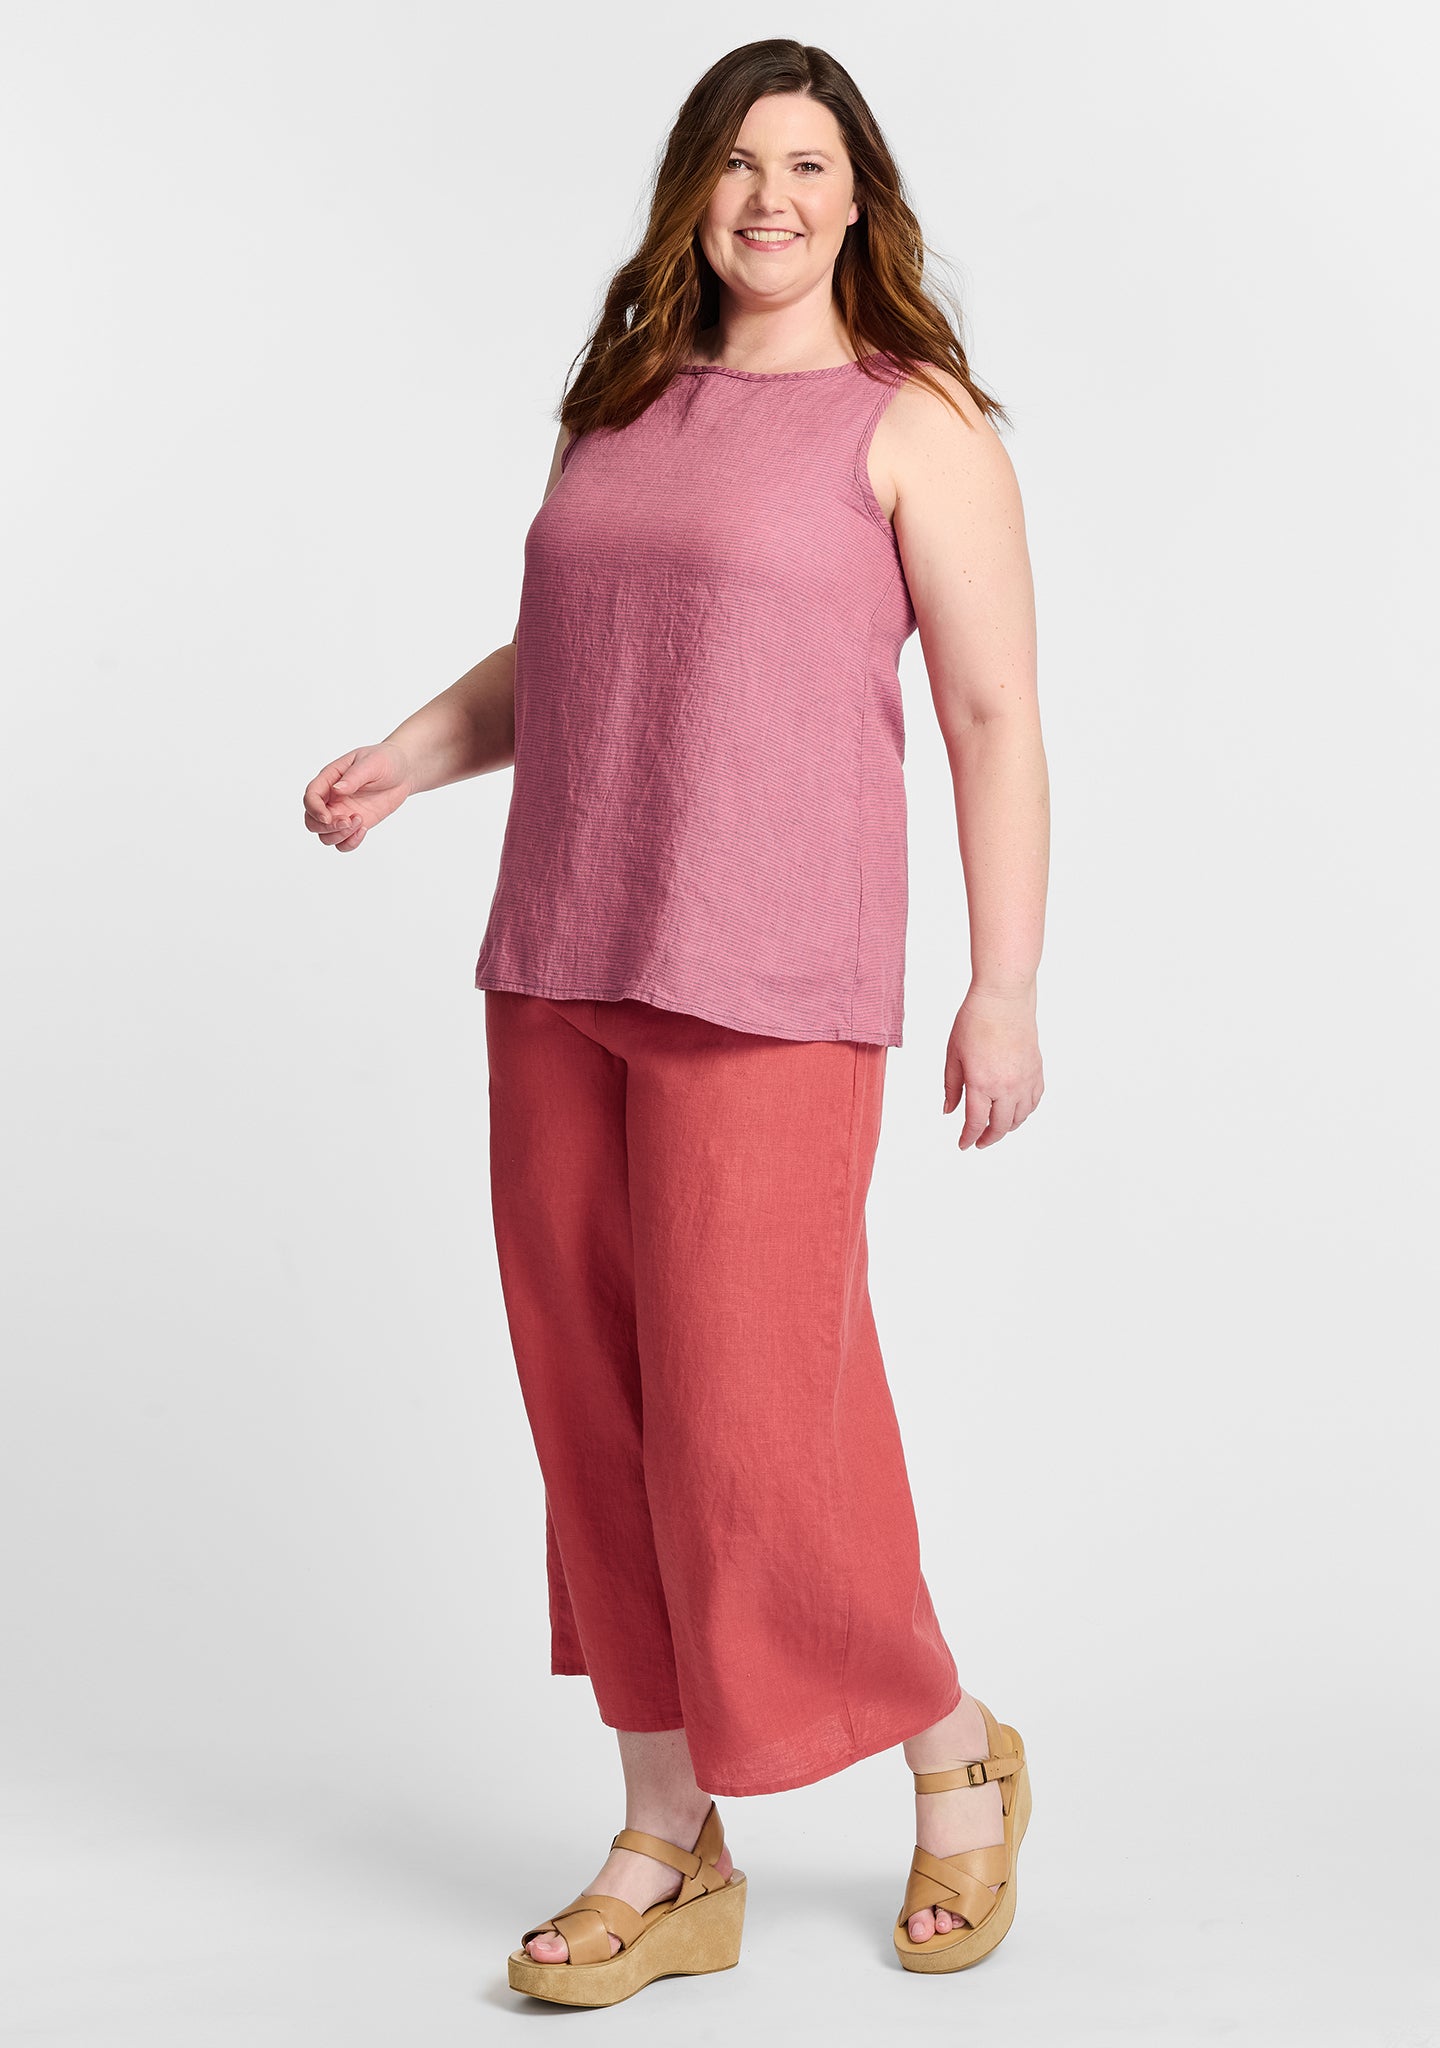 FLAX linen tank in red with linen pants in red